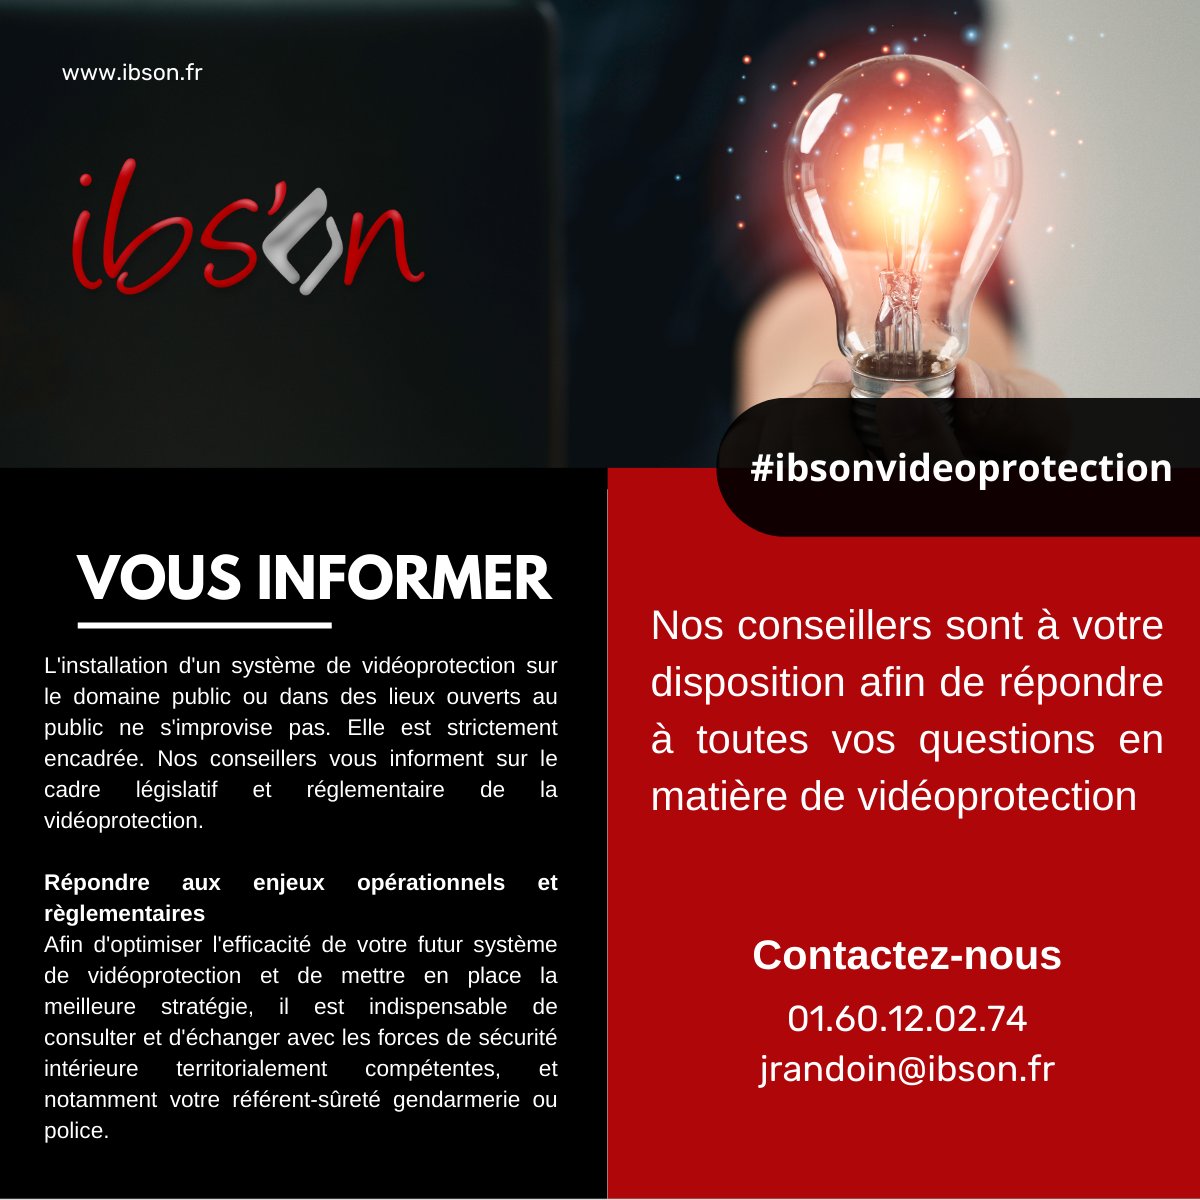 ibson.fr
#videoprotection #ibsonvideoprotection #MairesDeFrance #videosurveillance #surete #securite #maires #villes #cameras #installation #ipcamera #solution